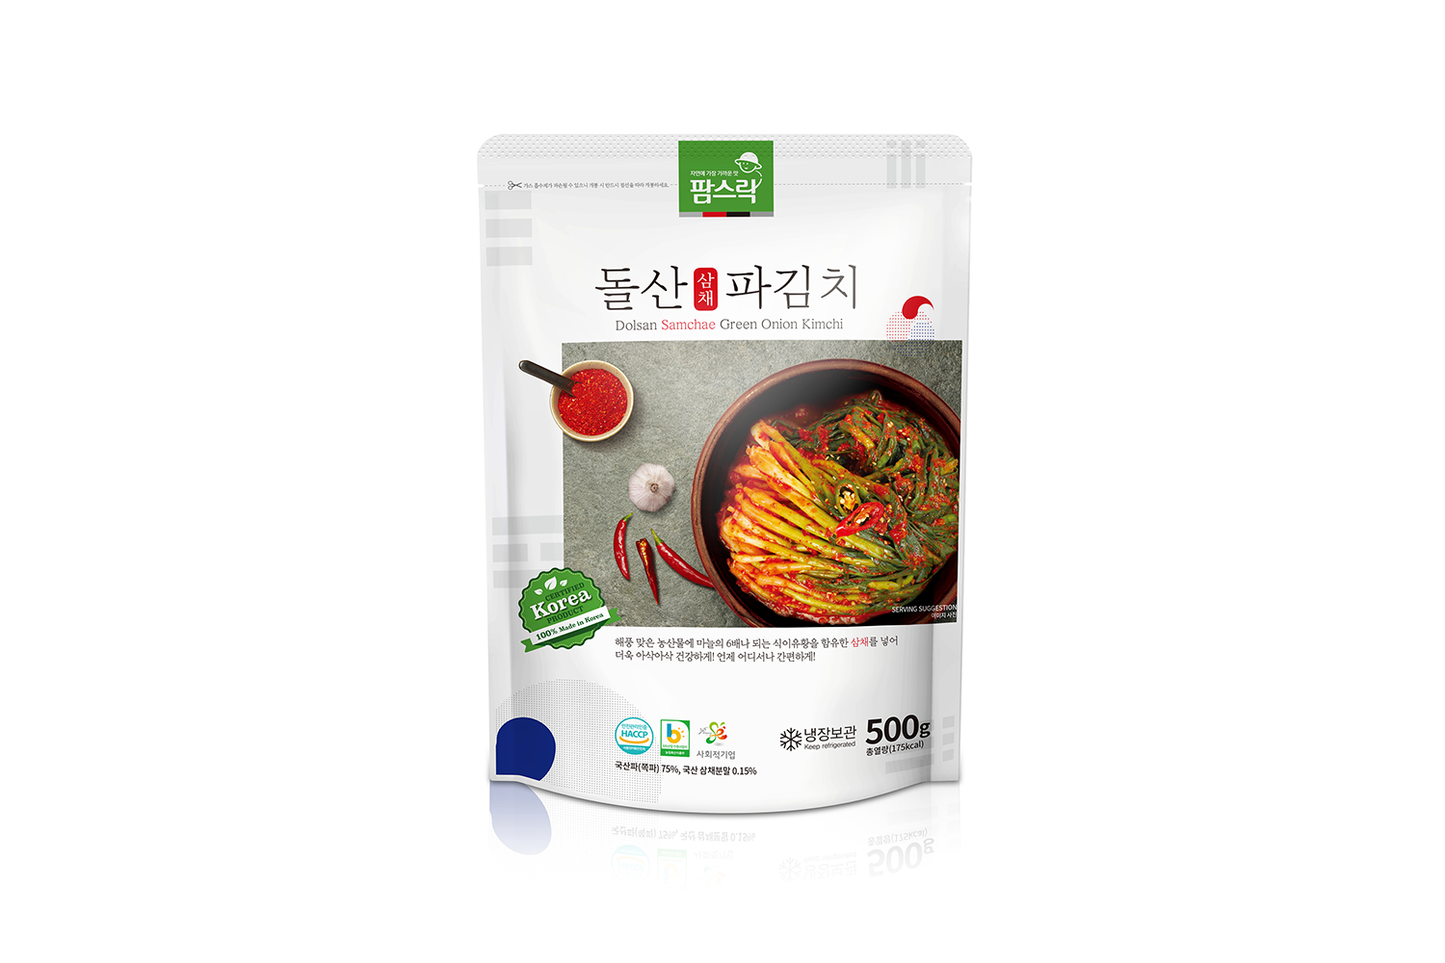 Dolsan Allium Hookeri Green Onion Kimchi(Scheduled to deliver from May. 13)